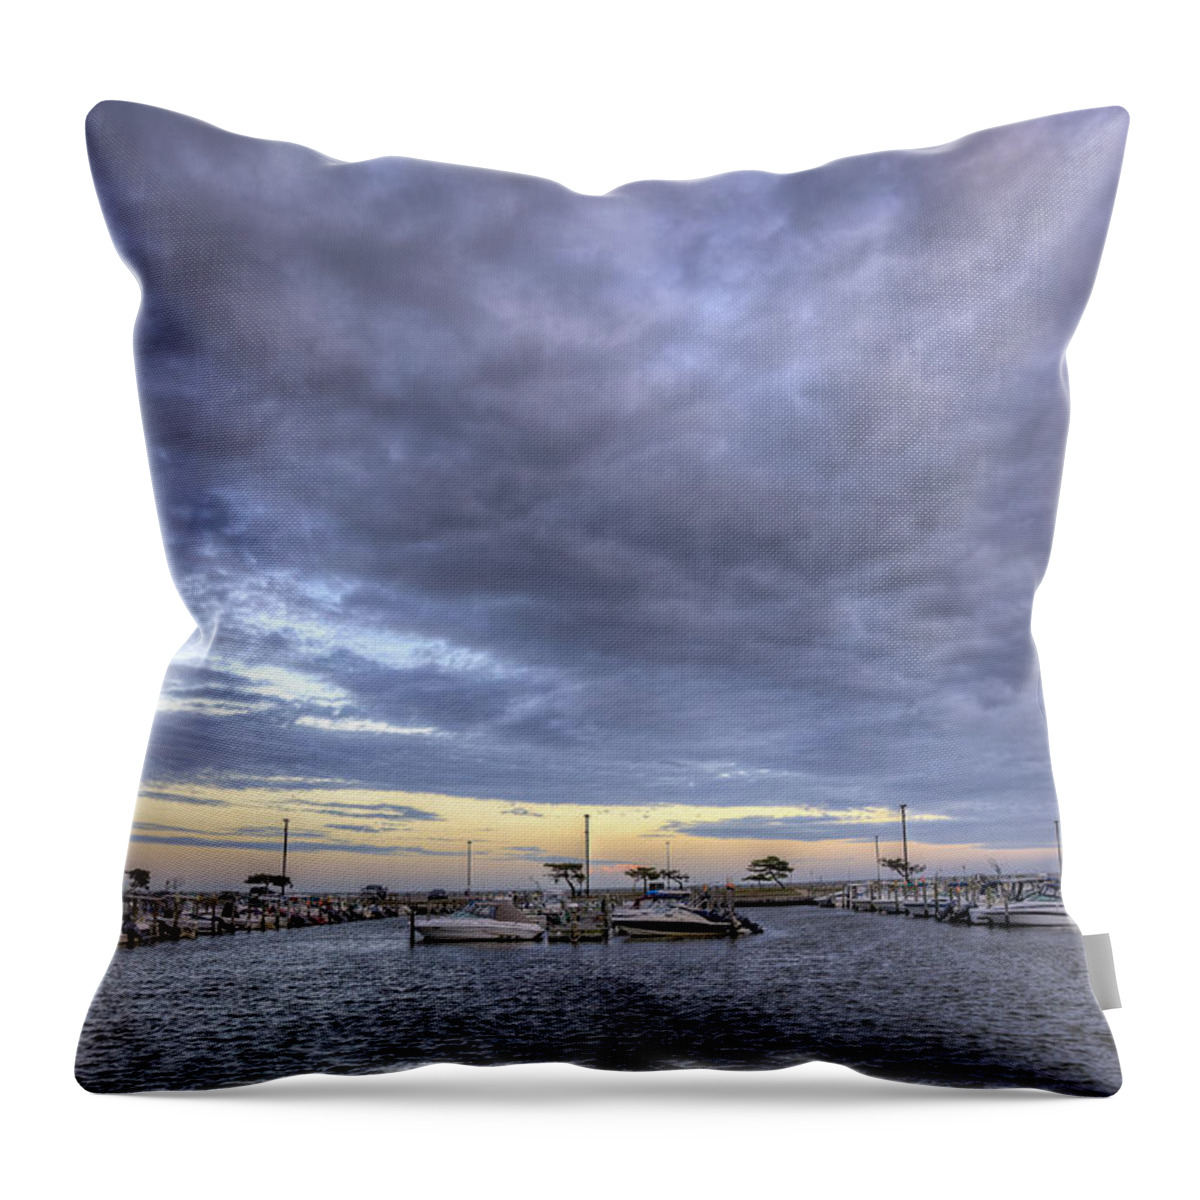 Boats Throw Pillow featuring the photograph The Docks at Bay Shore by Steve Gravano